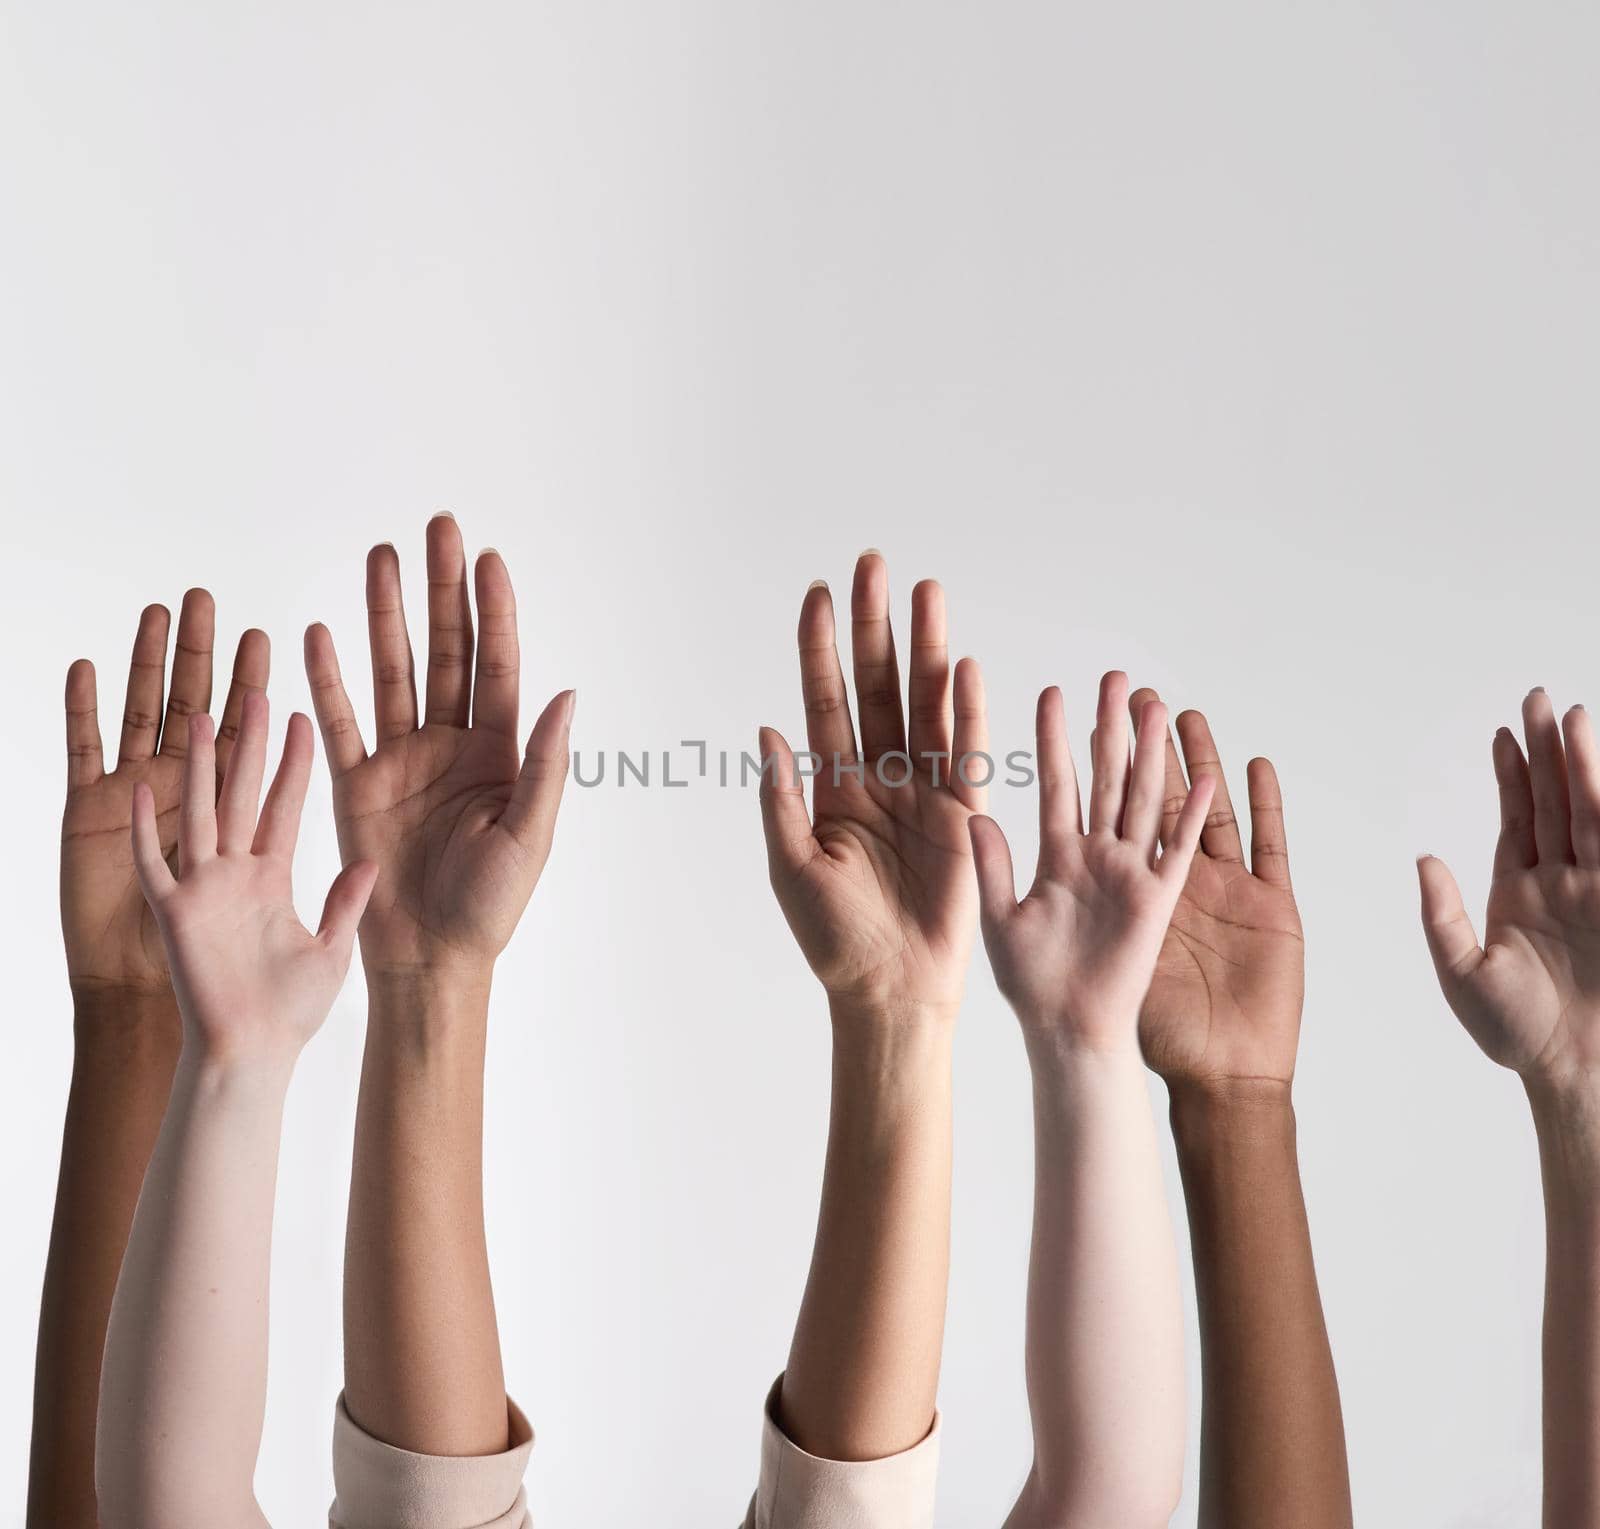 Making their voices heard. Shot of a diverse group of unidentifiable people holding their hands up against a white background. by YuriArcurs